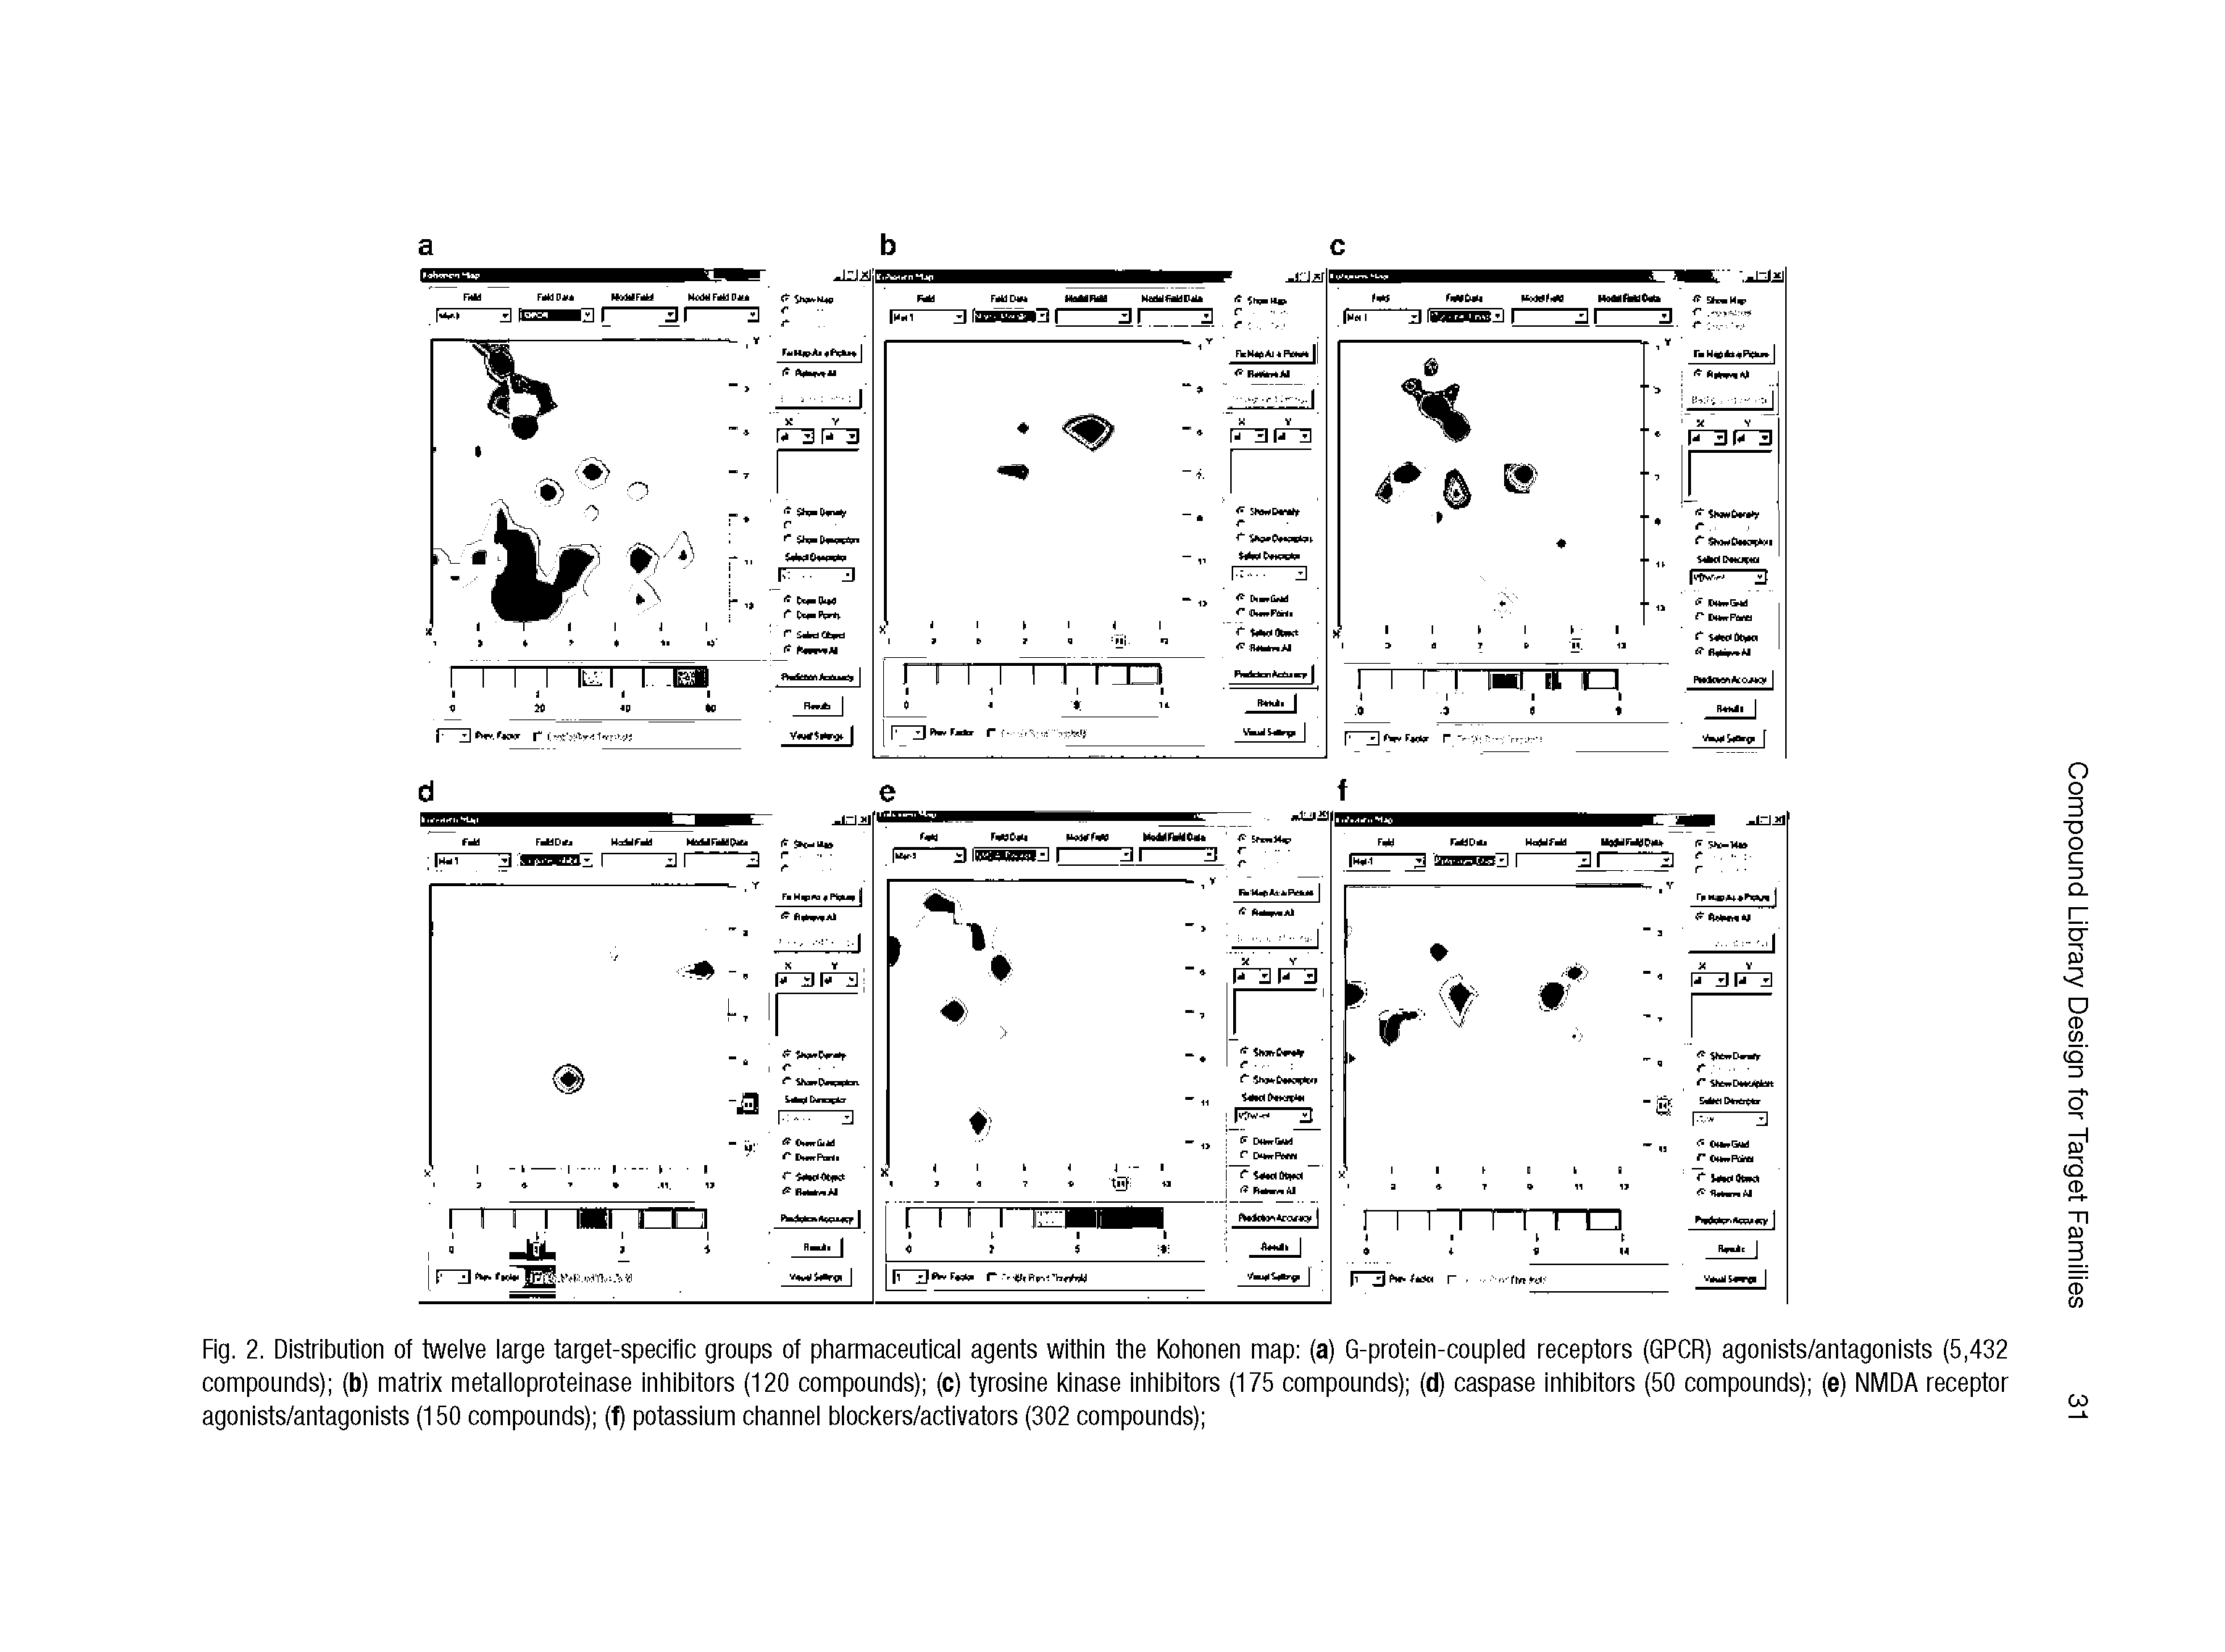 Fig. 2. Distribution of twelve large target-specific groups of pharmaceutical agents within the Kohonen map (a) G-protein-coupled receptors (GPCR) agonists/antagonists (5,432 compounds) (b) matrix metalloproteinase inhibitors (120 compounds) (c) tyrosine kinase inhibitors (175 compounds) (d) caspase inhibitors (50 compounds) (e) NMDA receptor agonists/antagonists (150 compounds) (f) potassium channel blockers/activators (302 compounds) ...